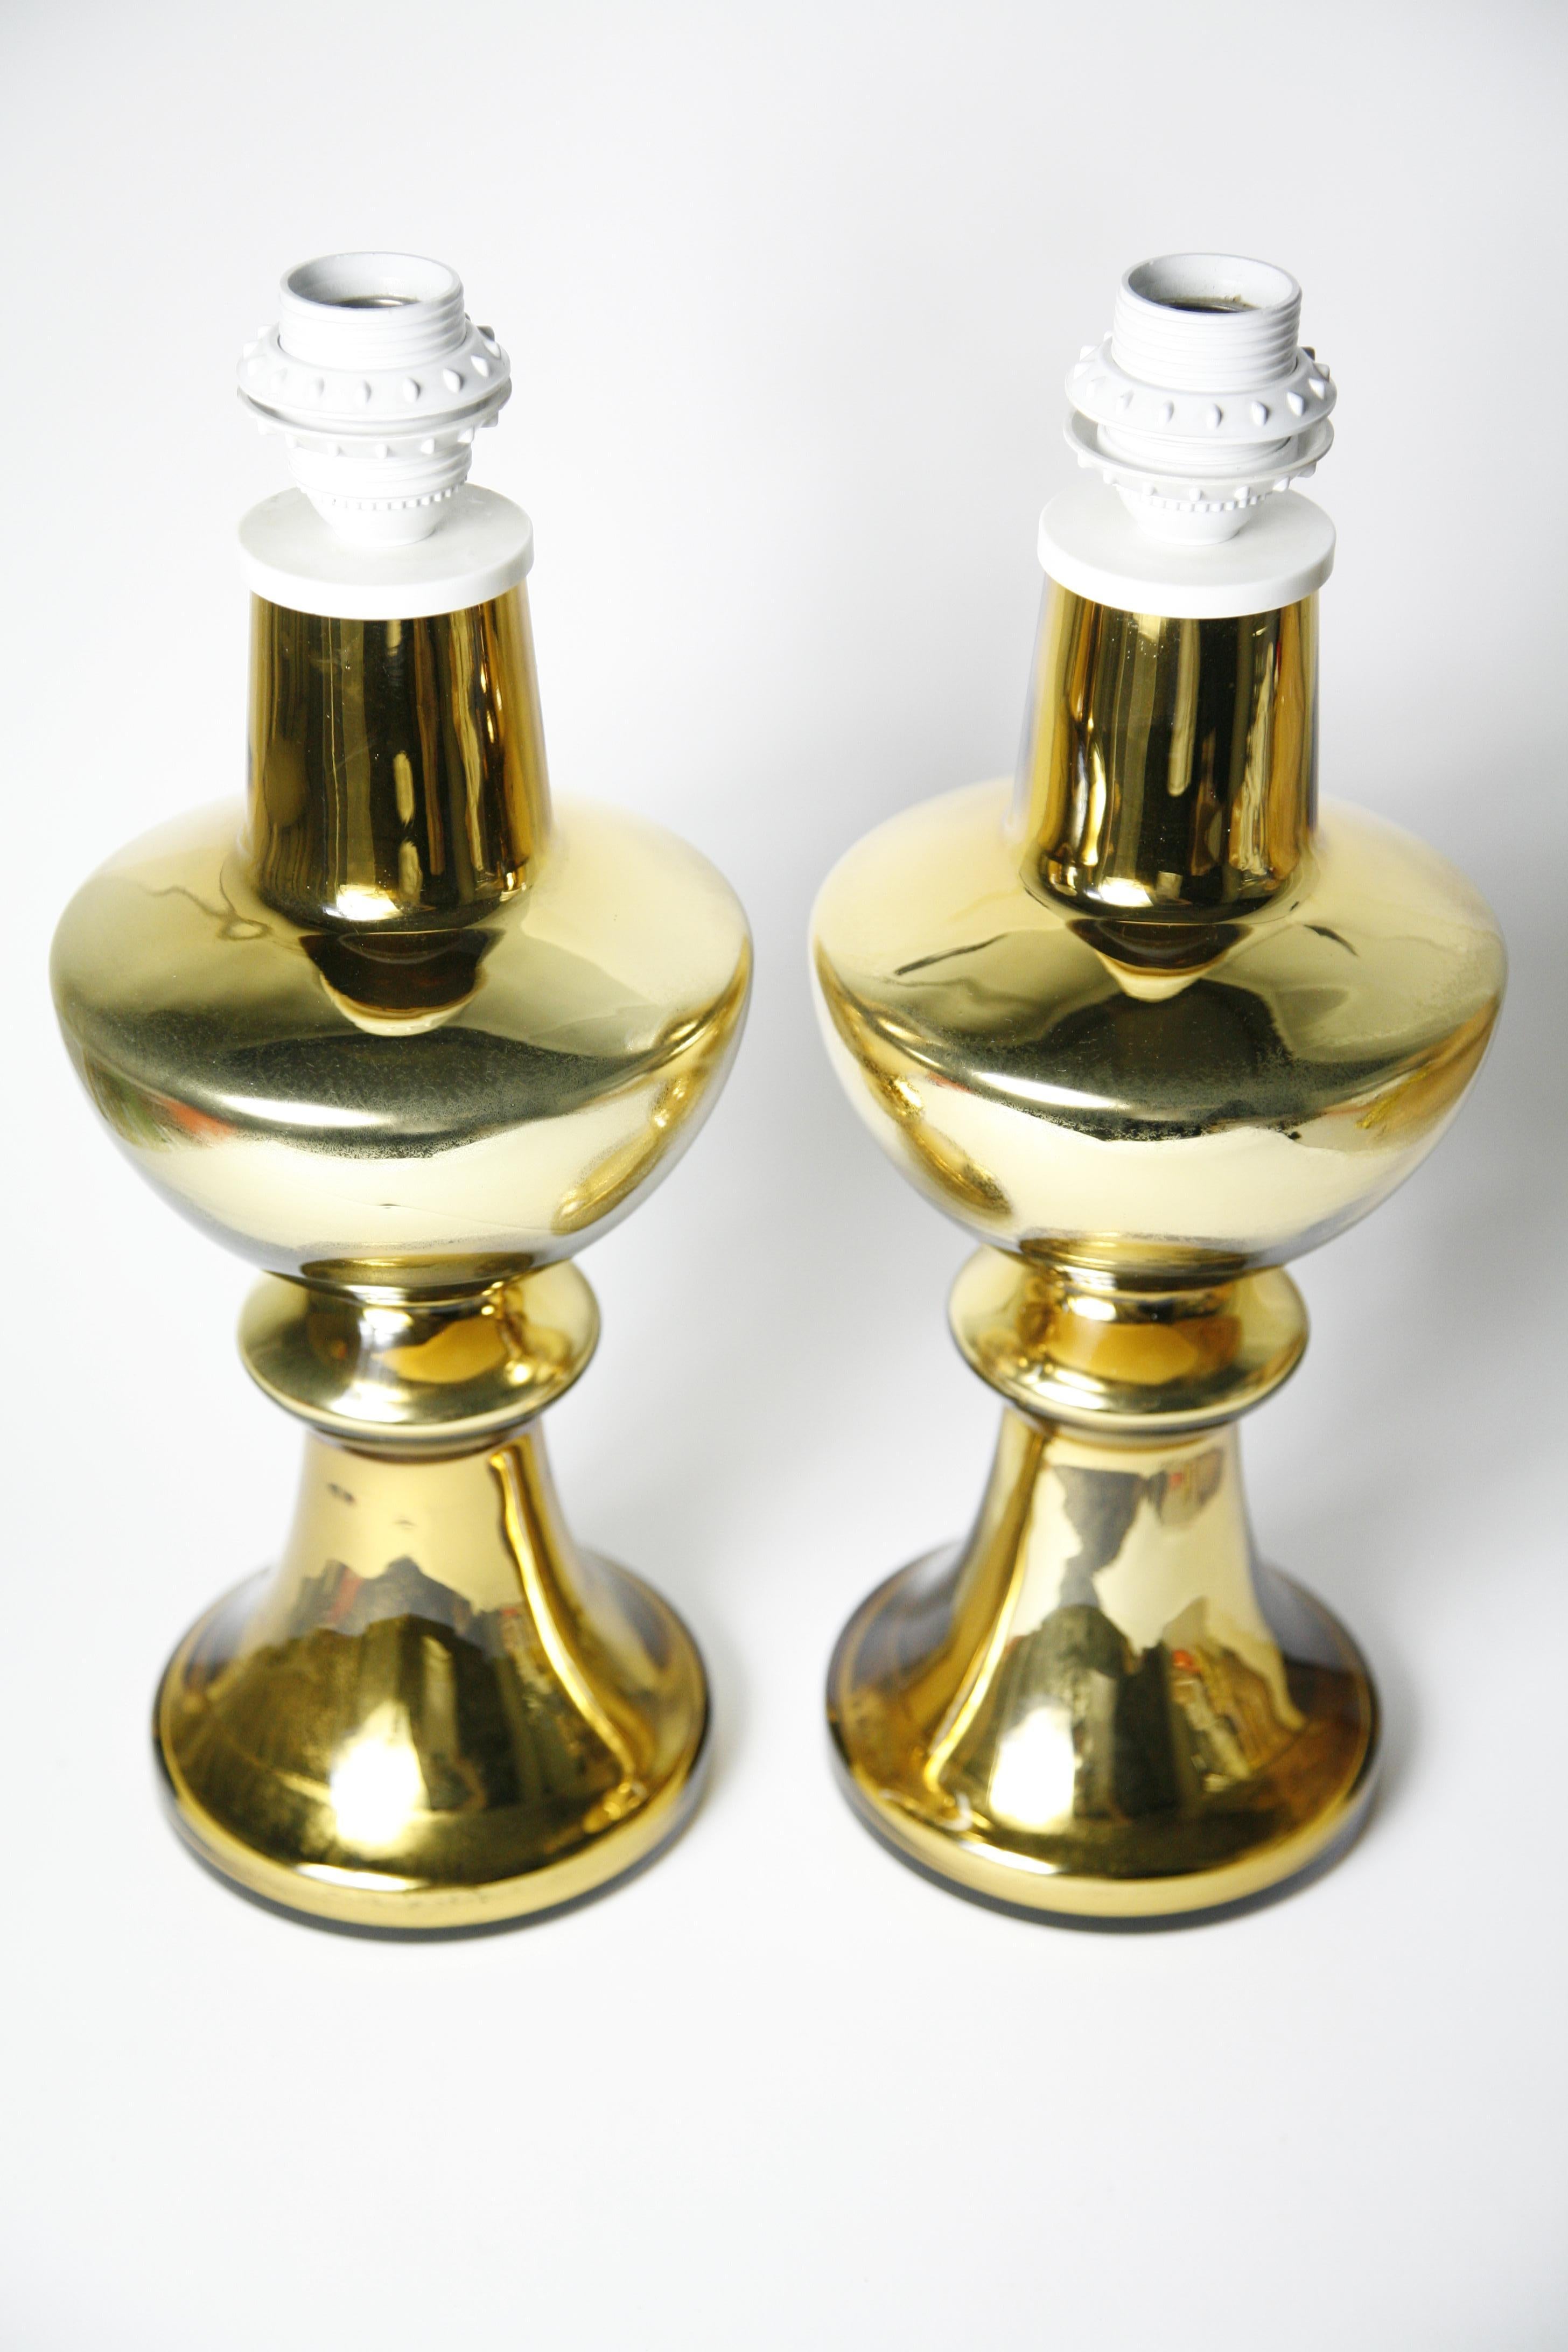 Cast Pair of Gold Glass Encased Lamps with Patina by Flygsfors, Sweden, 1970 For Sale